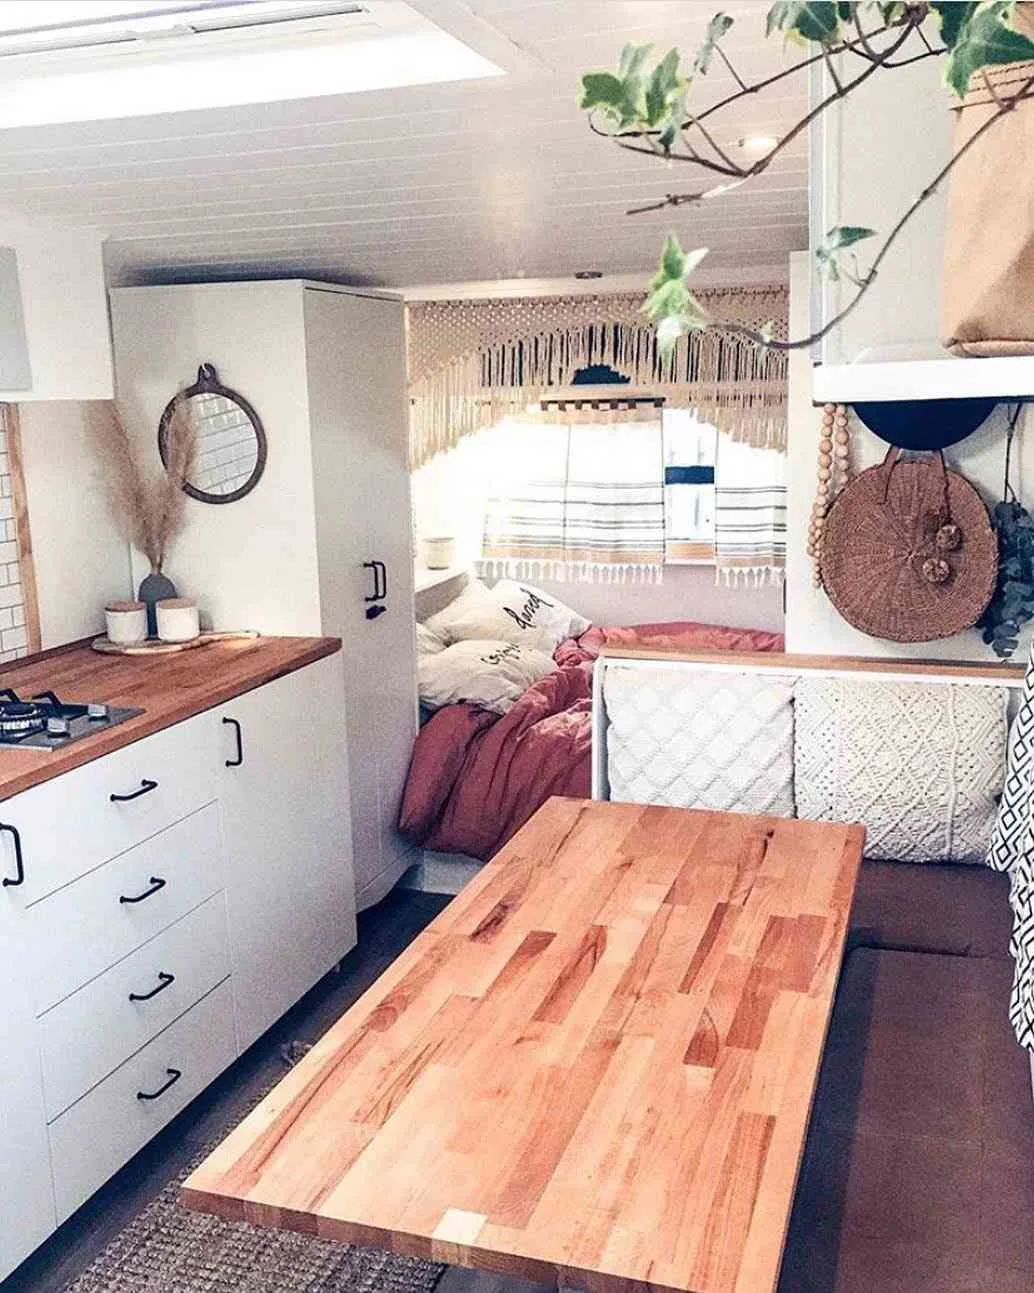 Interior of a renovated travel trailer showing the dining area and kitchen